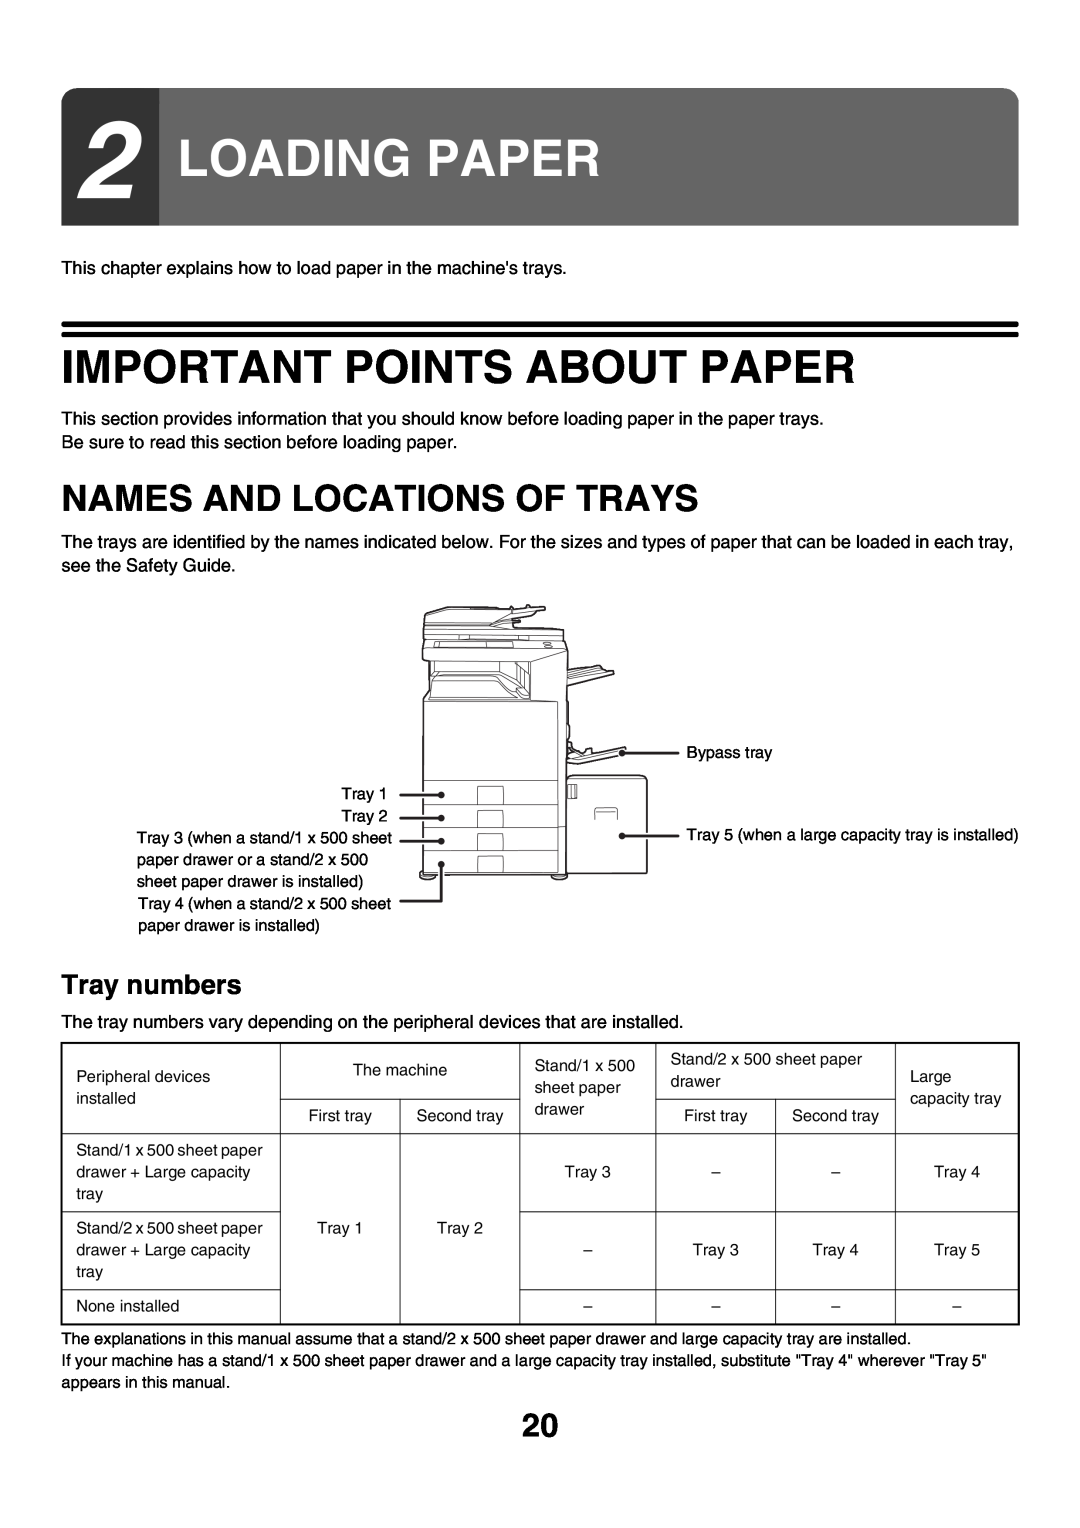 Sharp MX-3500N manual Loading Paper, Important Points About Paper, Names And Locations Of Trays, Tray numbers 